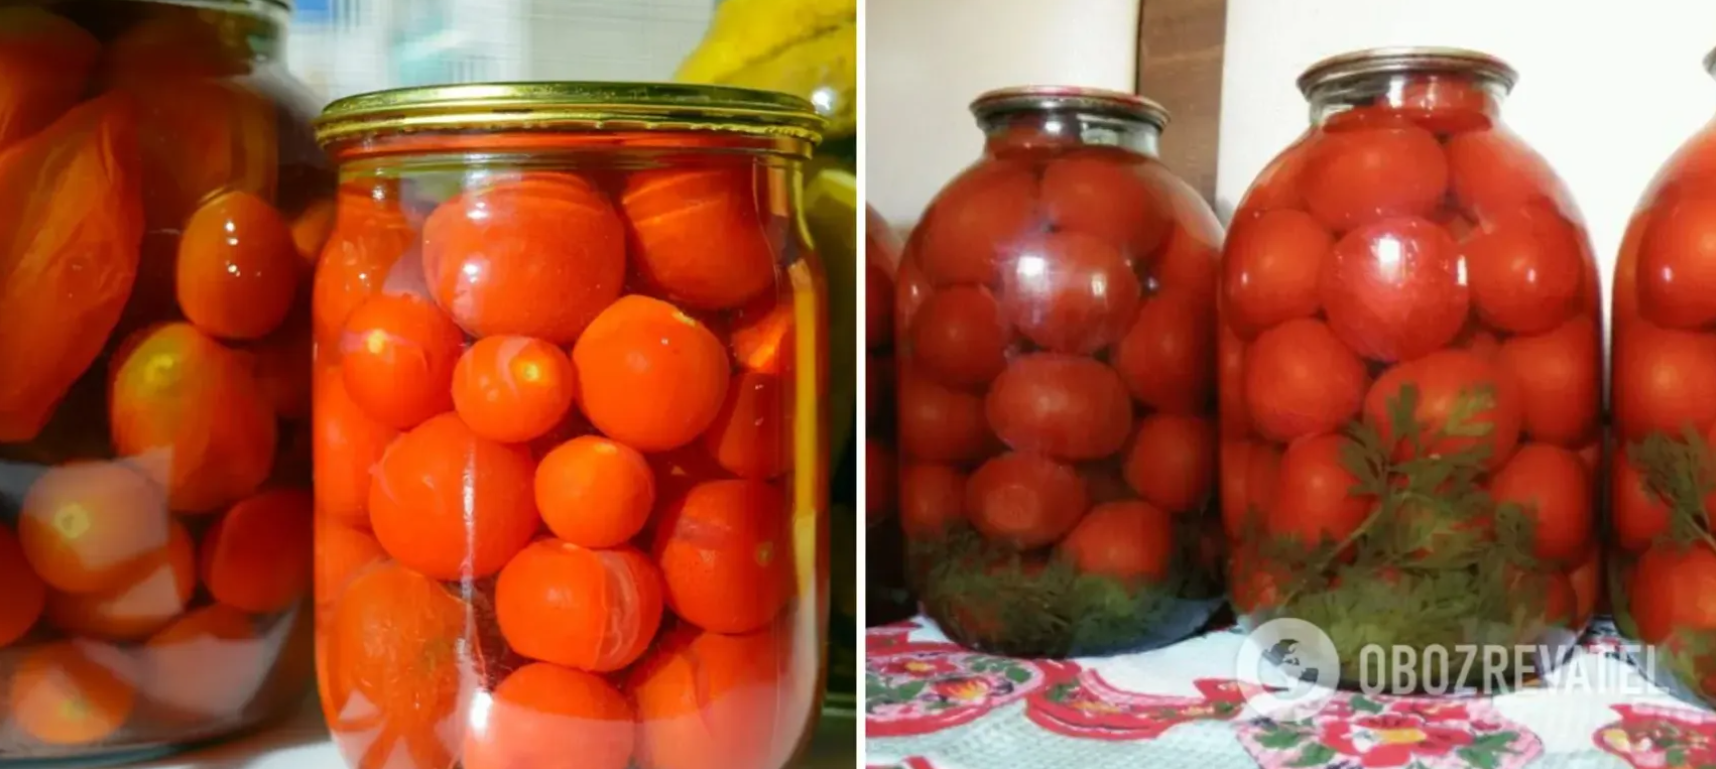 Quick quenched tomatoes